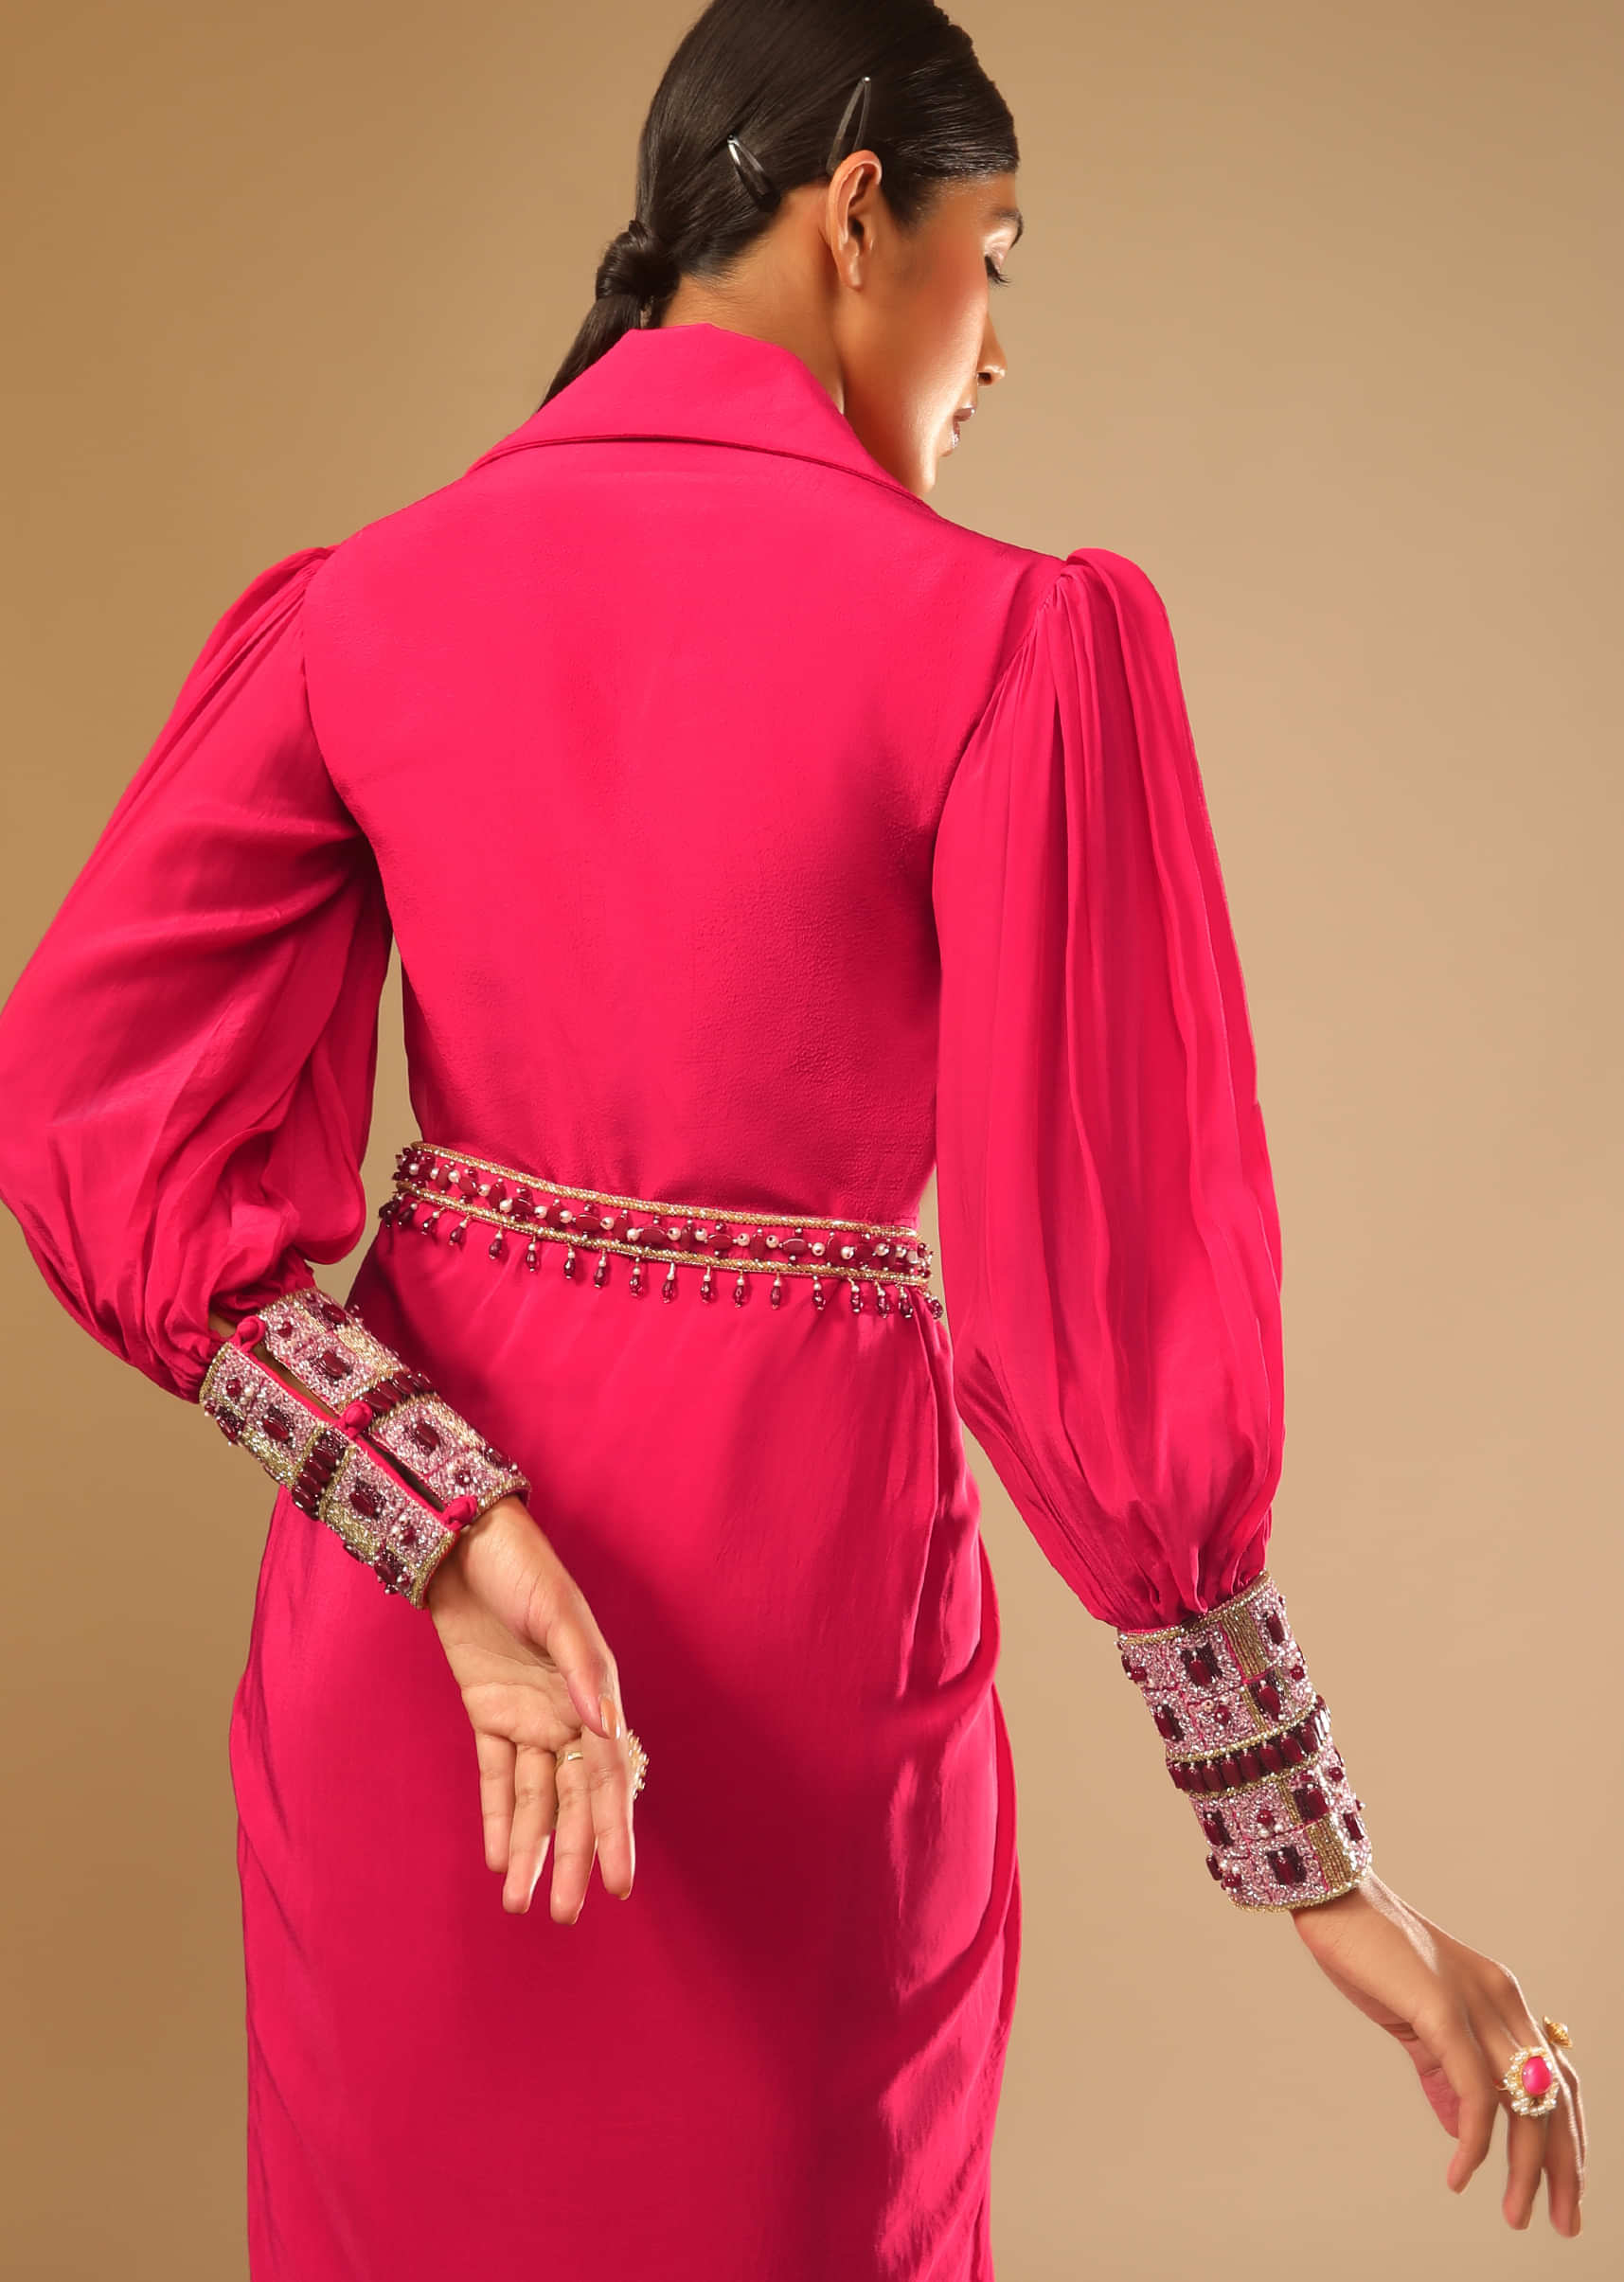 Hot Pink Dress With A Chunky Embroidered Bishop Sleeves And Collar Neckline  